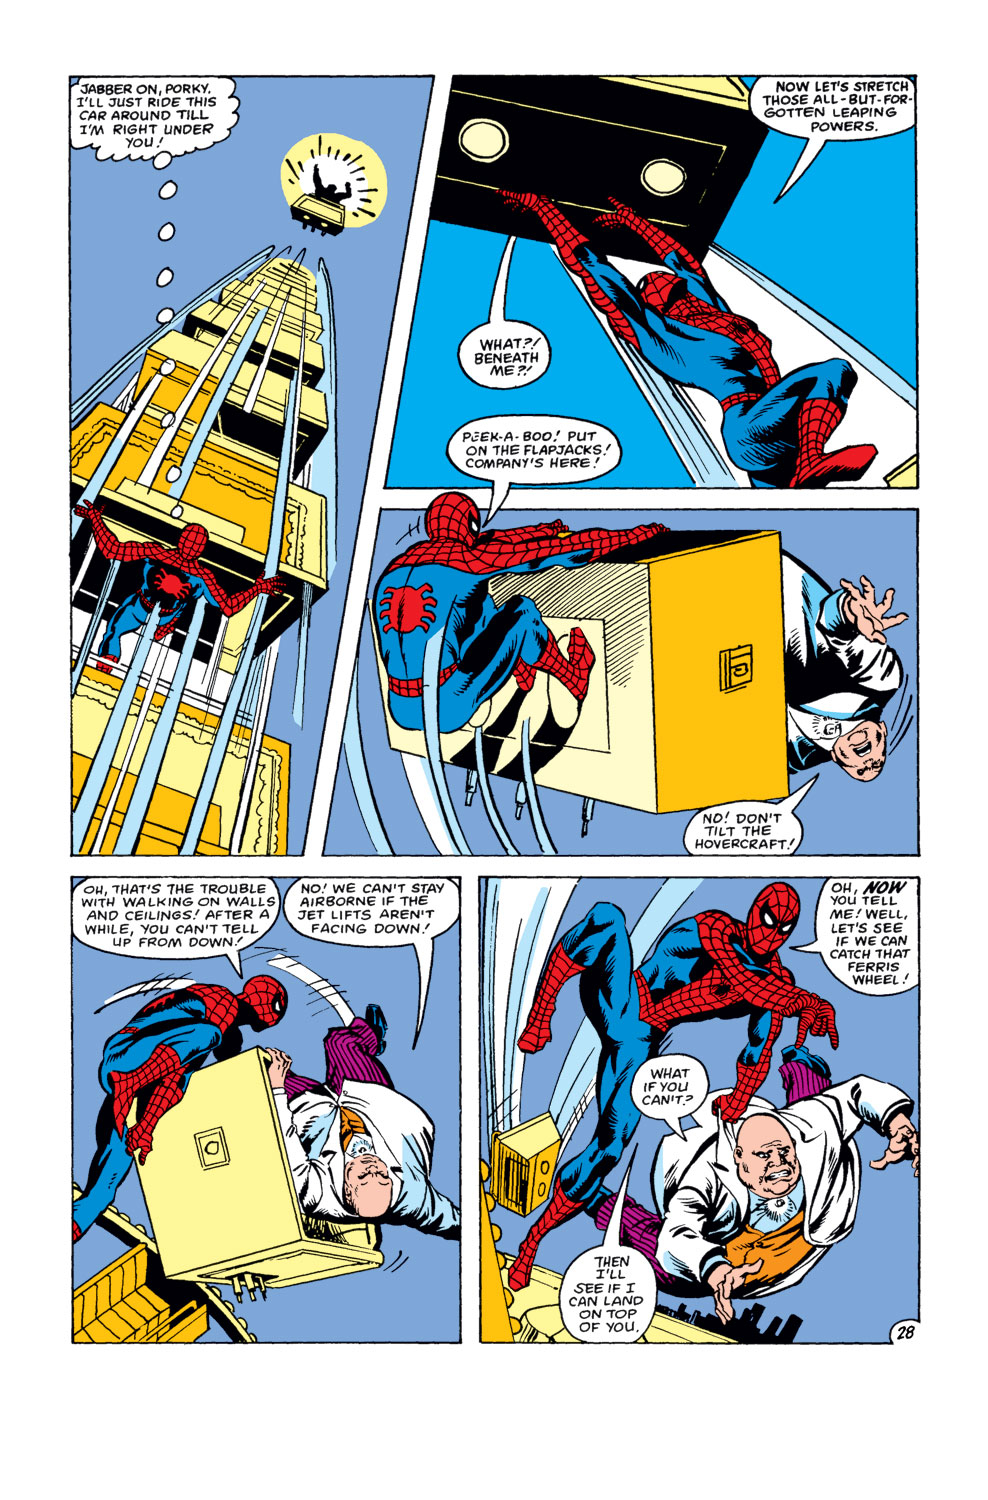 What If? (1977) issue 30 - Spider-Man's clone lived - Page 29